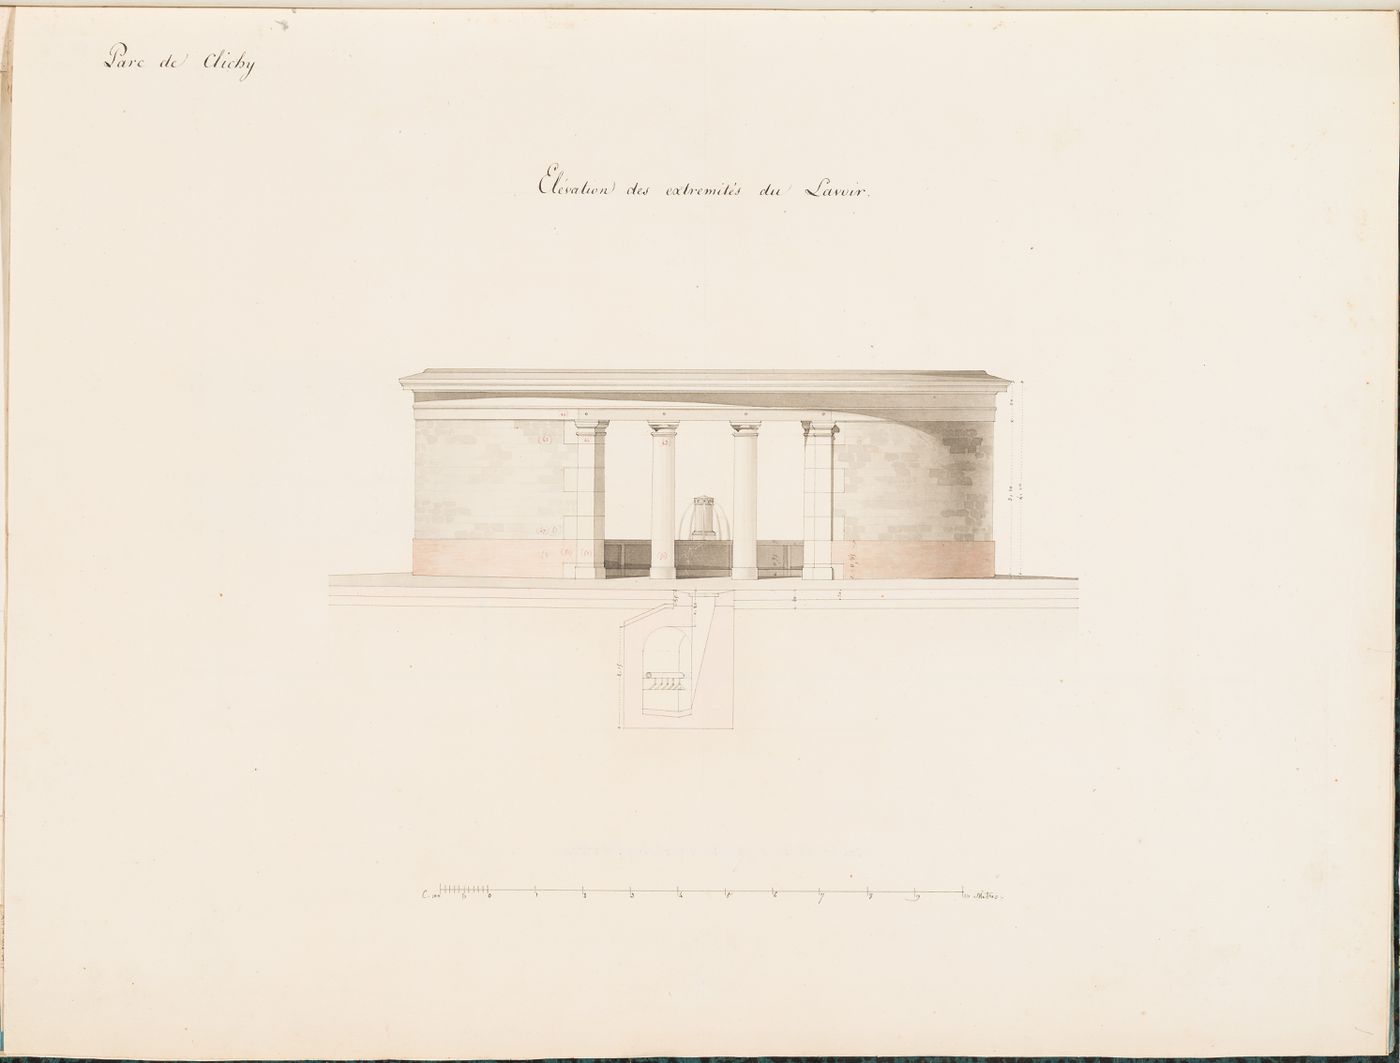 Side elevation for a washhouse with a section for its waterworks, Parc de Clichy